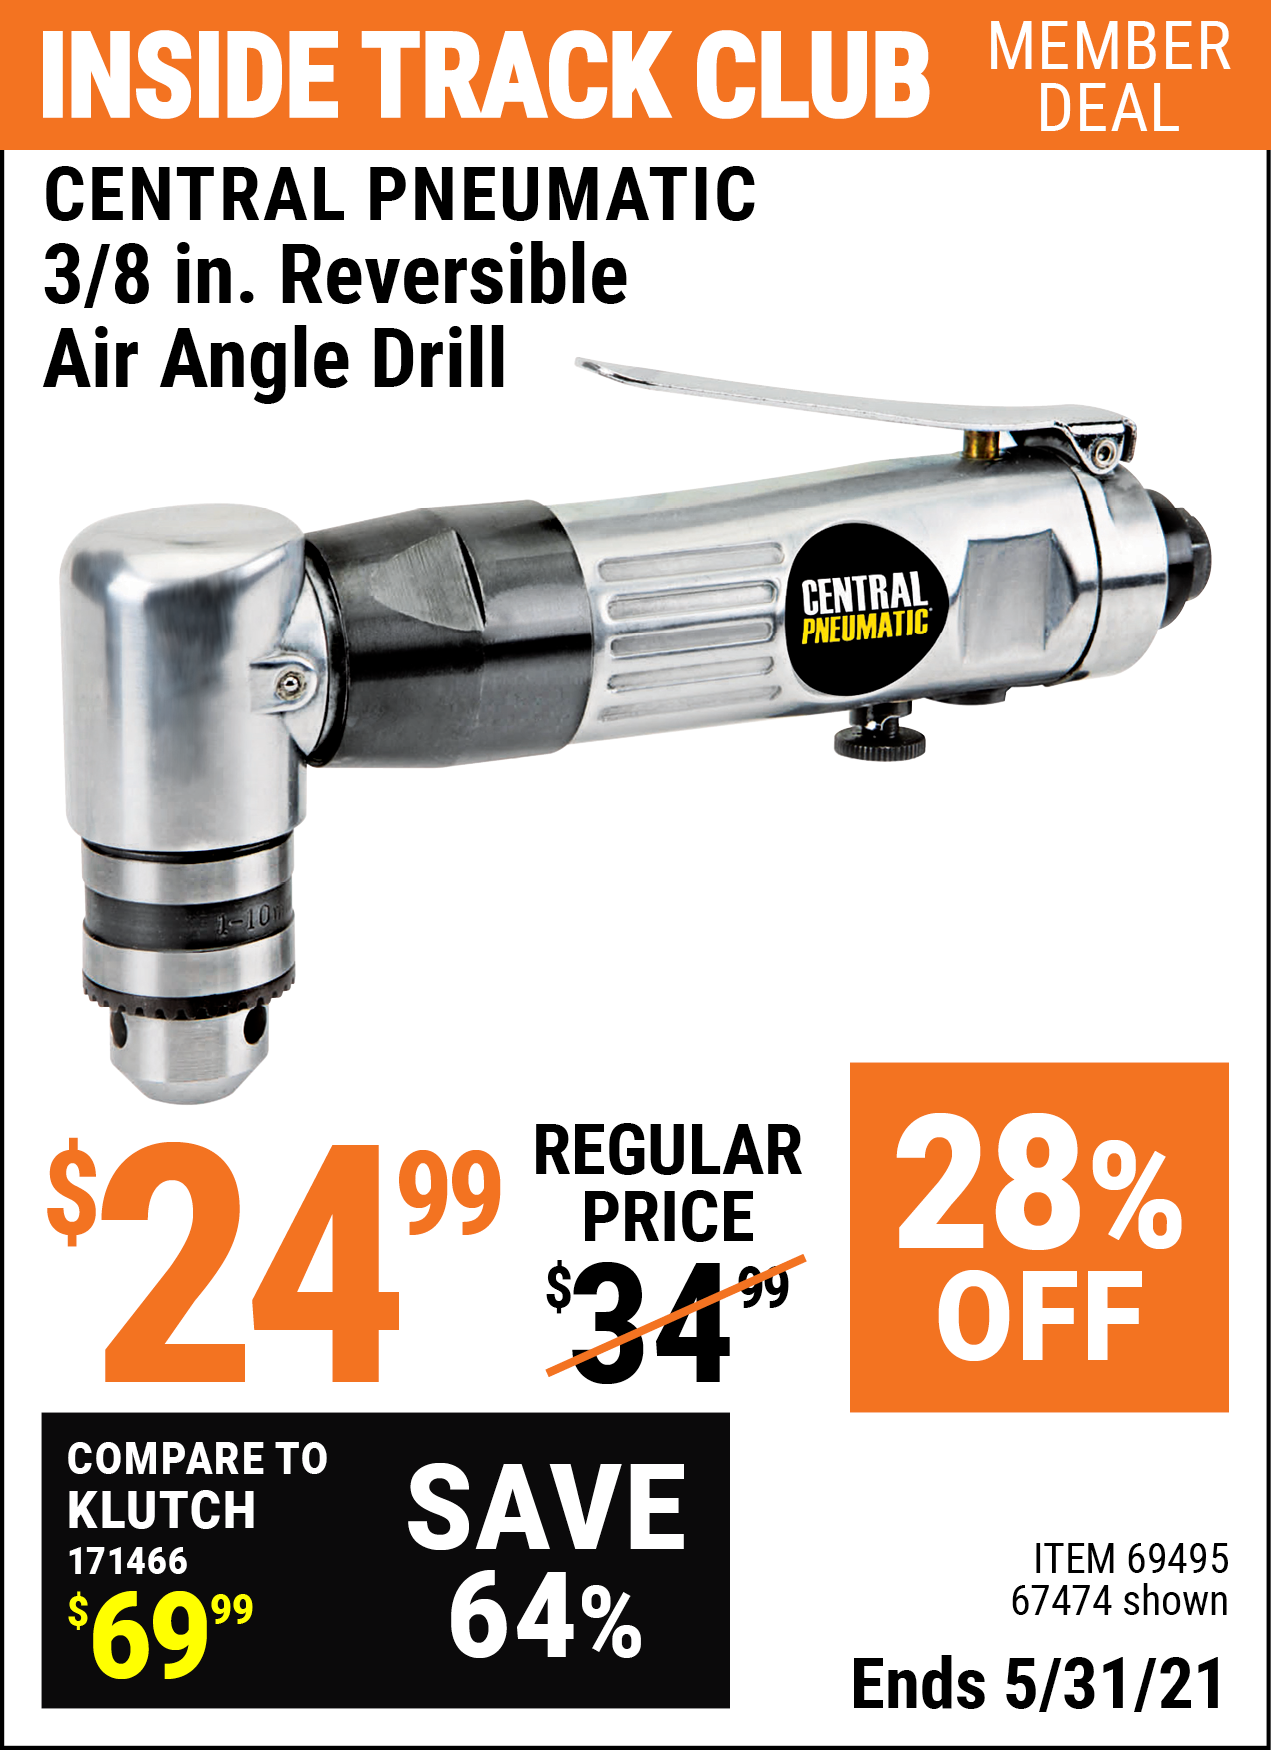 Inside Track Club members can buy the CENTRAL PNEUMATIC 3/8 in. Reversible Air Angle Drill (Item 67474/69495) for $24.99, valid through 5/31/2021.